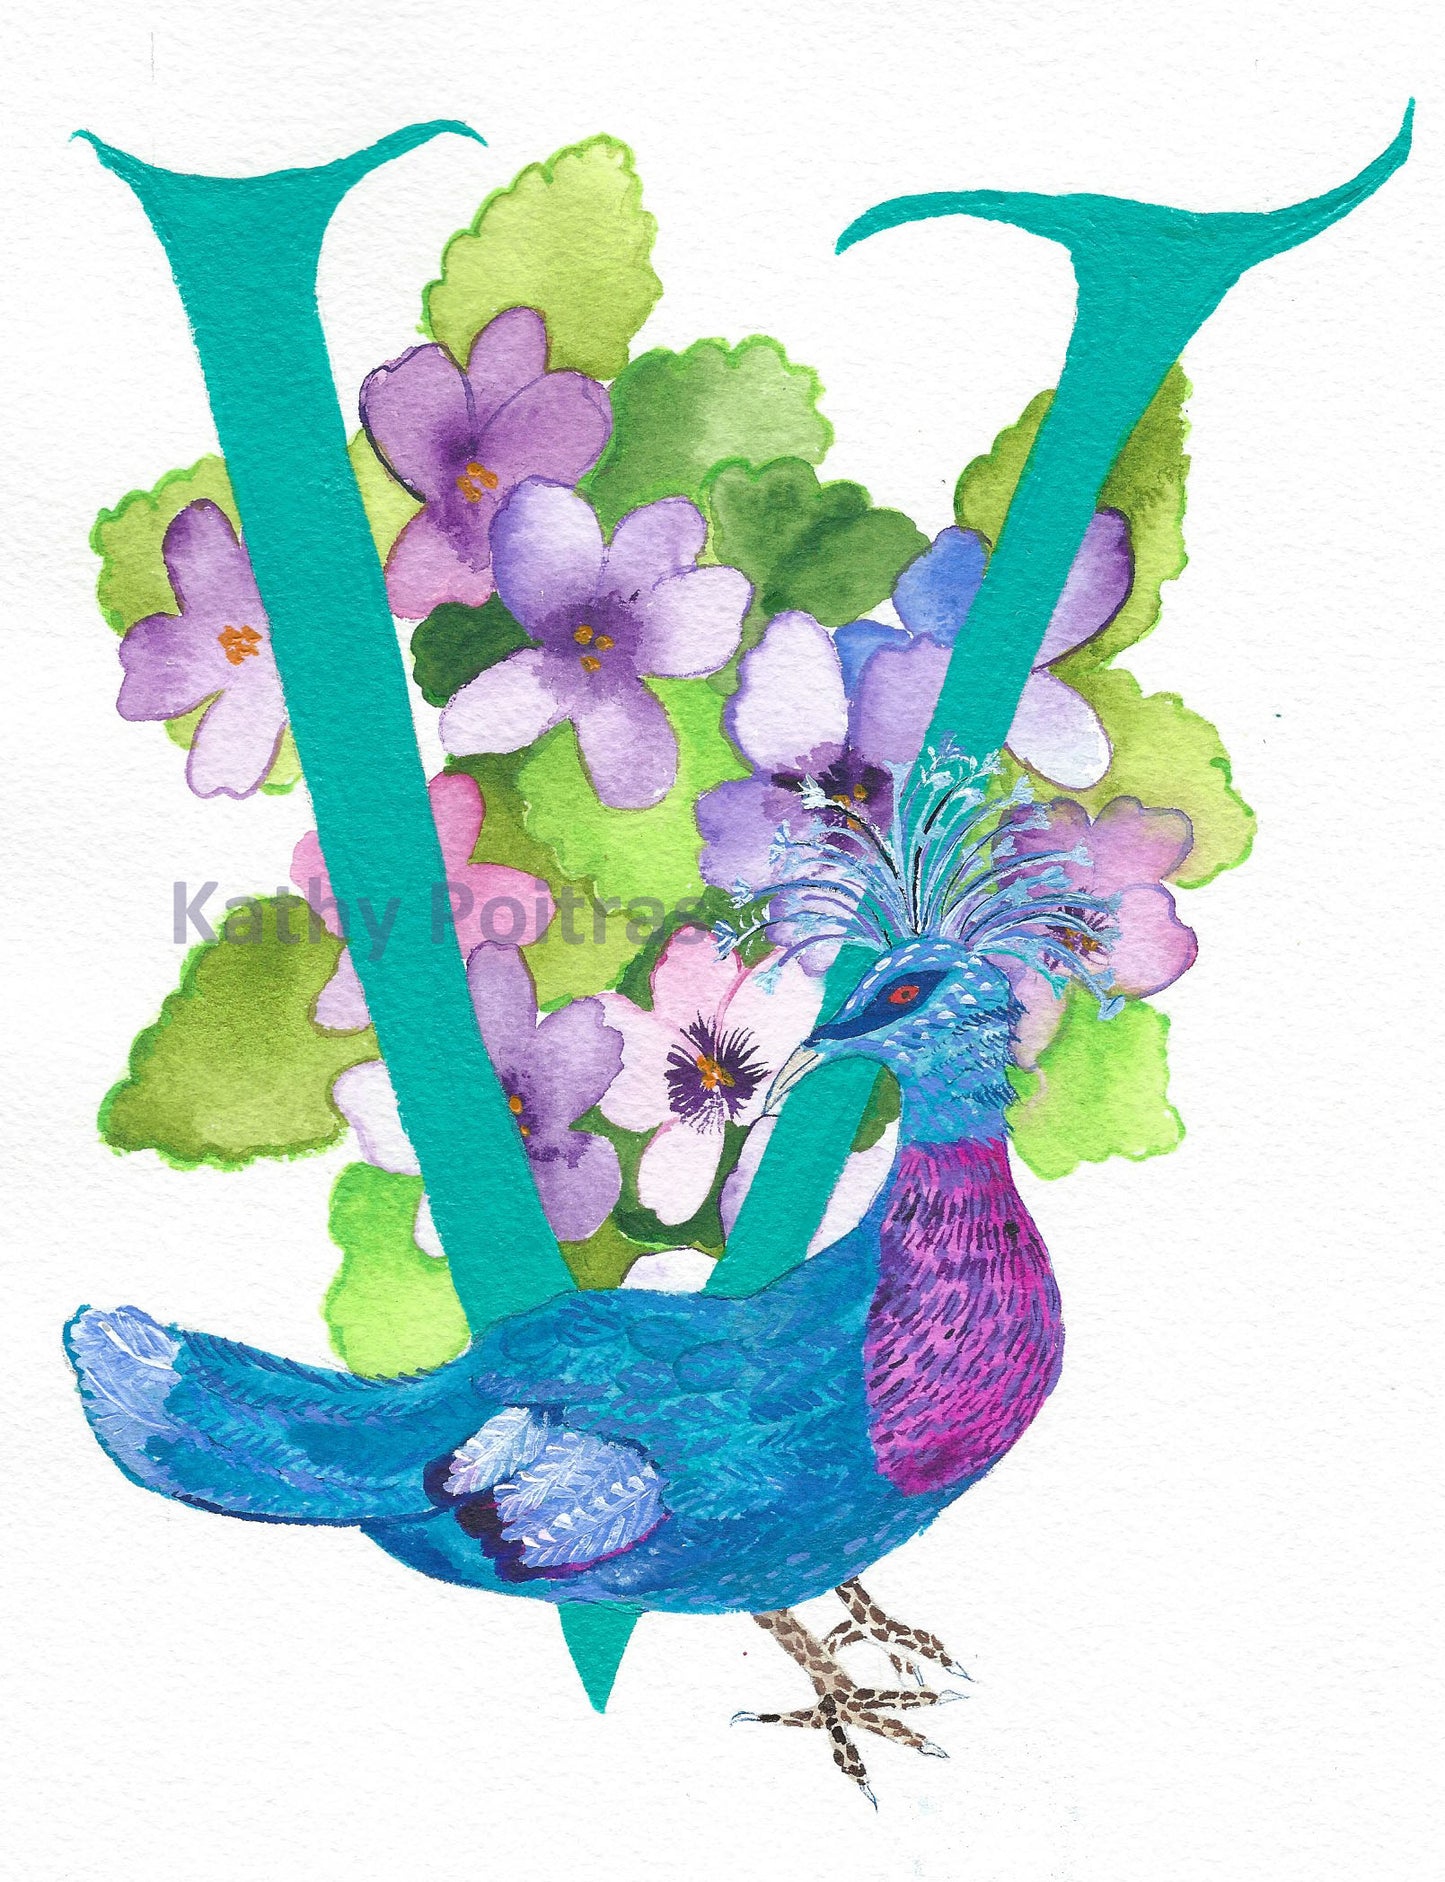 Letter V for Victorian Pigeon and Violets, by artist Kathy Poitras. 